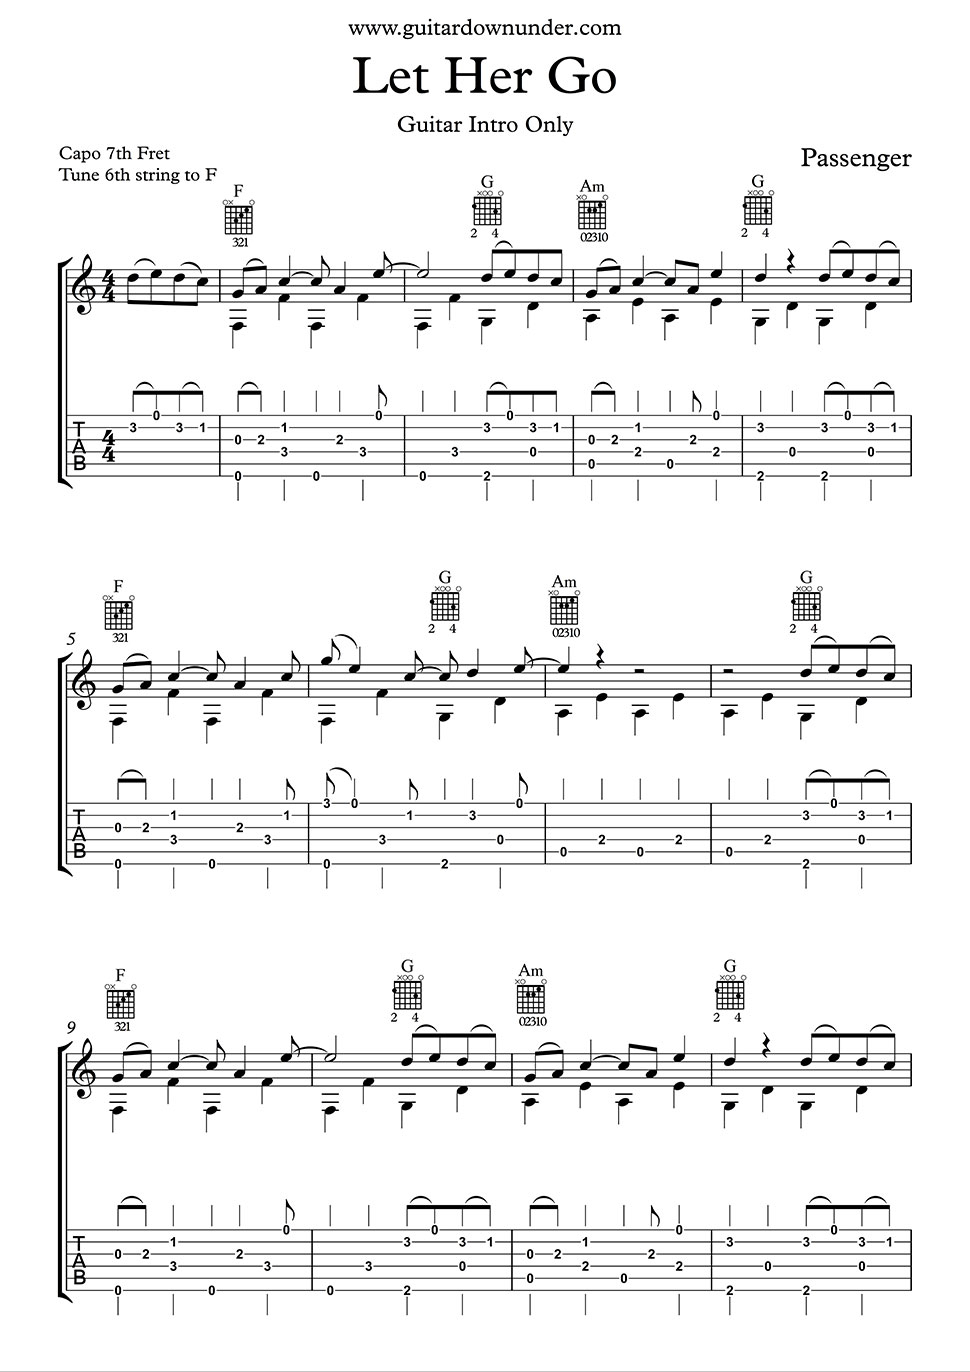 Let It Go Chords Let Her Go Chords And Lyrics Passenger Includes Correct Guitar Tab